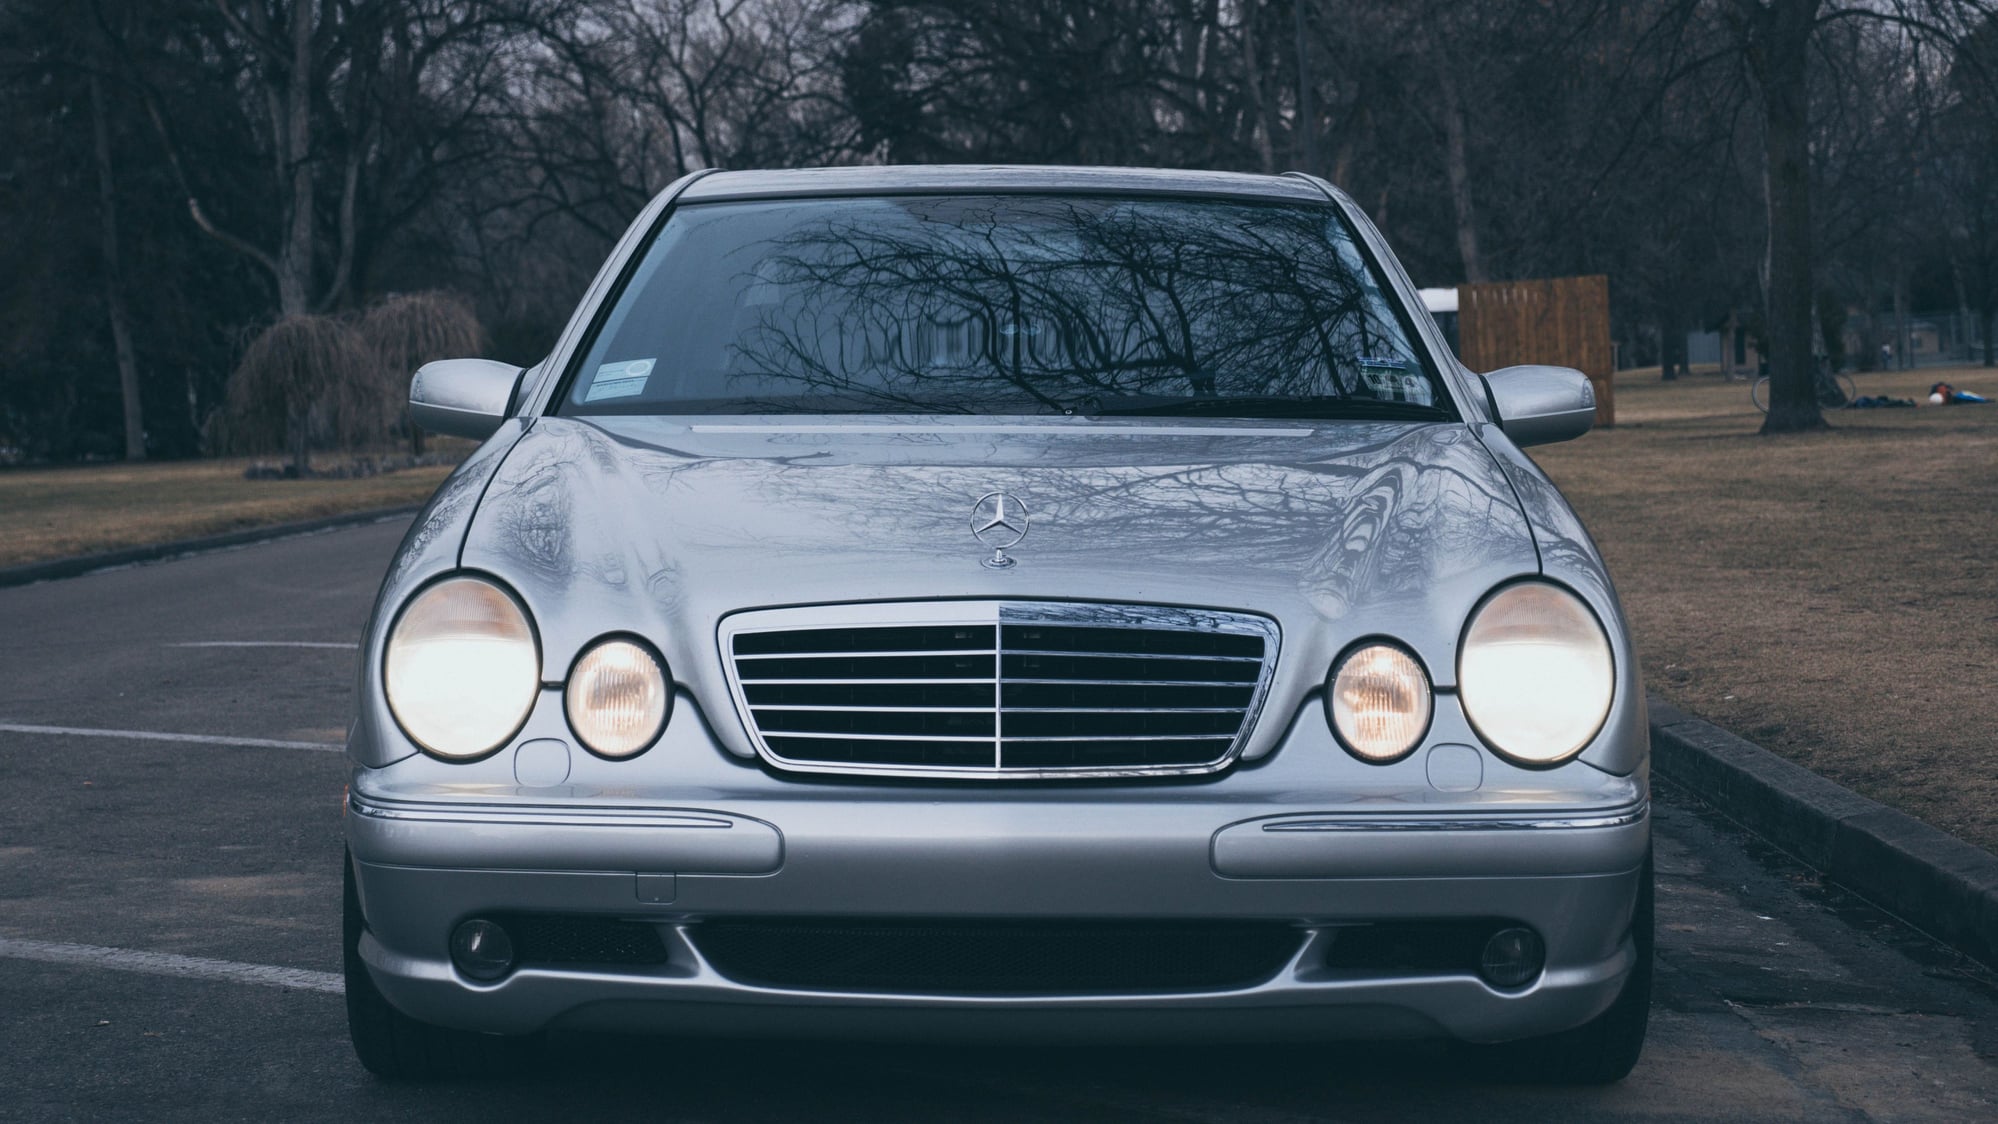 2001 Mercedes-Benz E55 AMG - 2001 E55 AMG - Used - VIN WDBJF74J71B363849 - 132,000 Miles - 8 cyl - 2WD - Automatic - Sedan - Silver - Fort Collins, CO 80526, United States